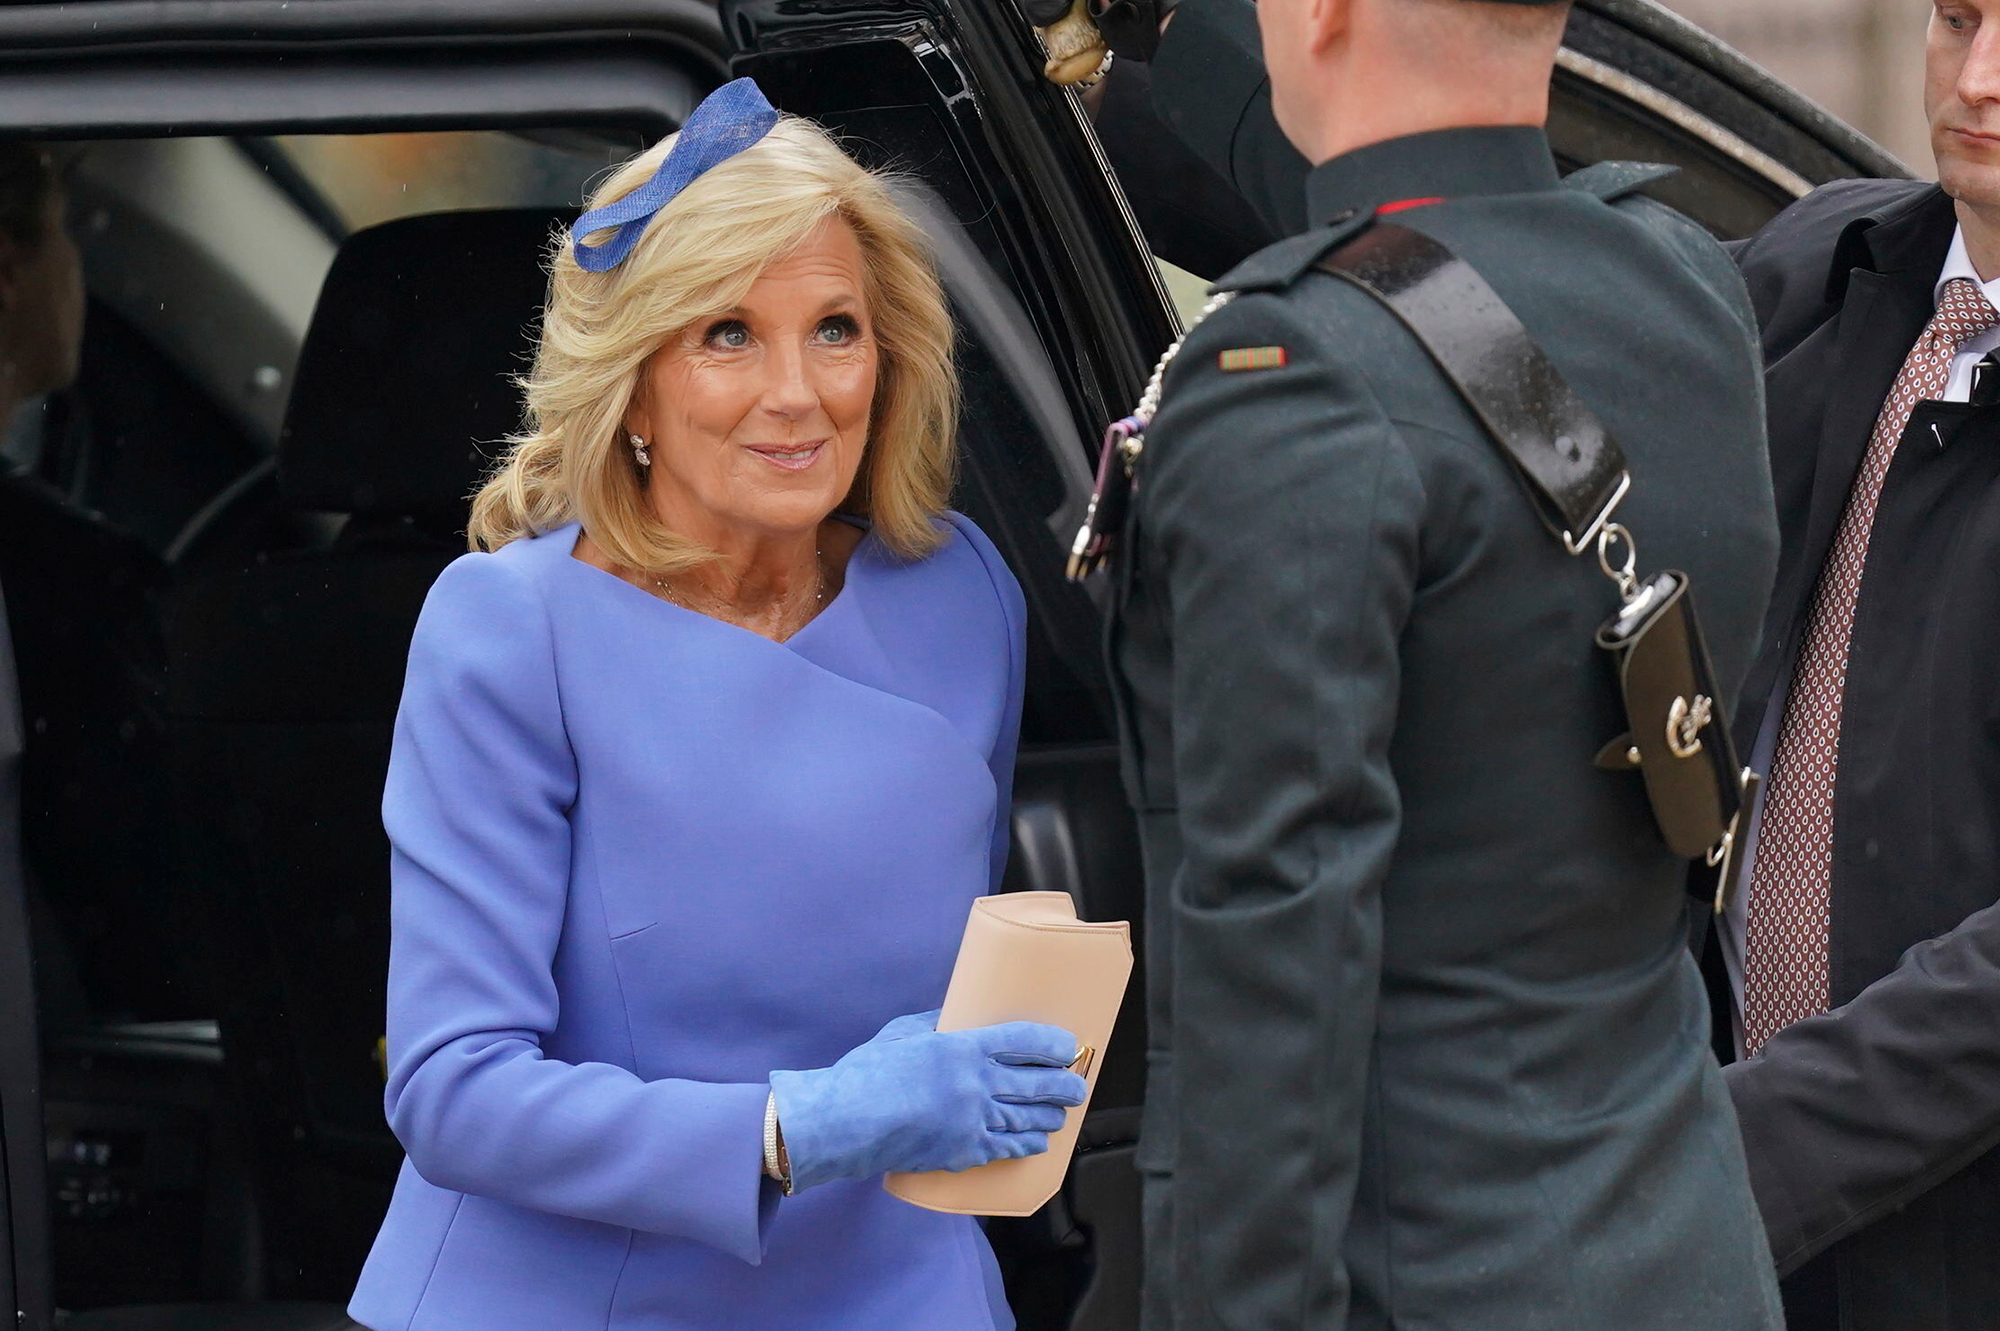 US First Lady Jill Biden arrives at Westminster Abbey prior to the coronation ceremony of Britain's King Charles III in London Saturday, May 6.